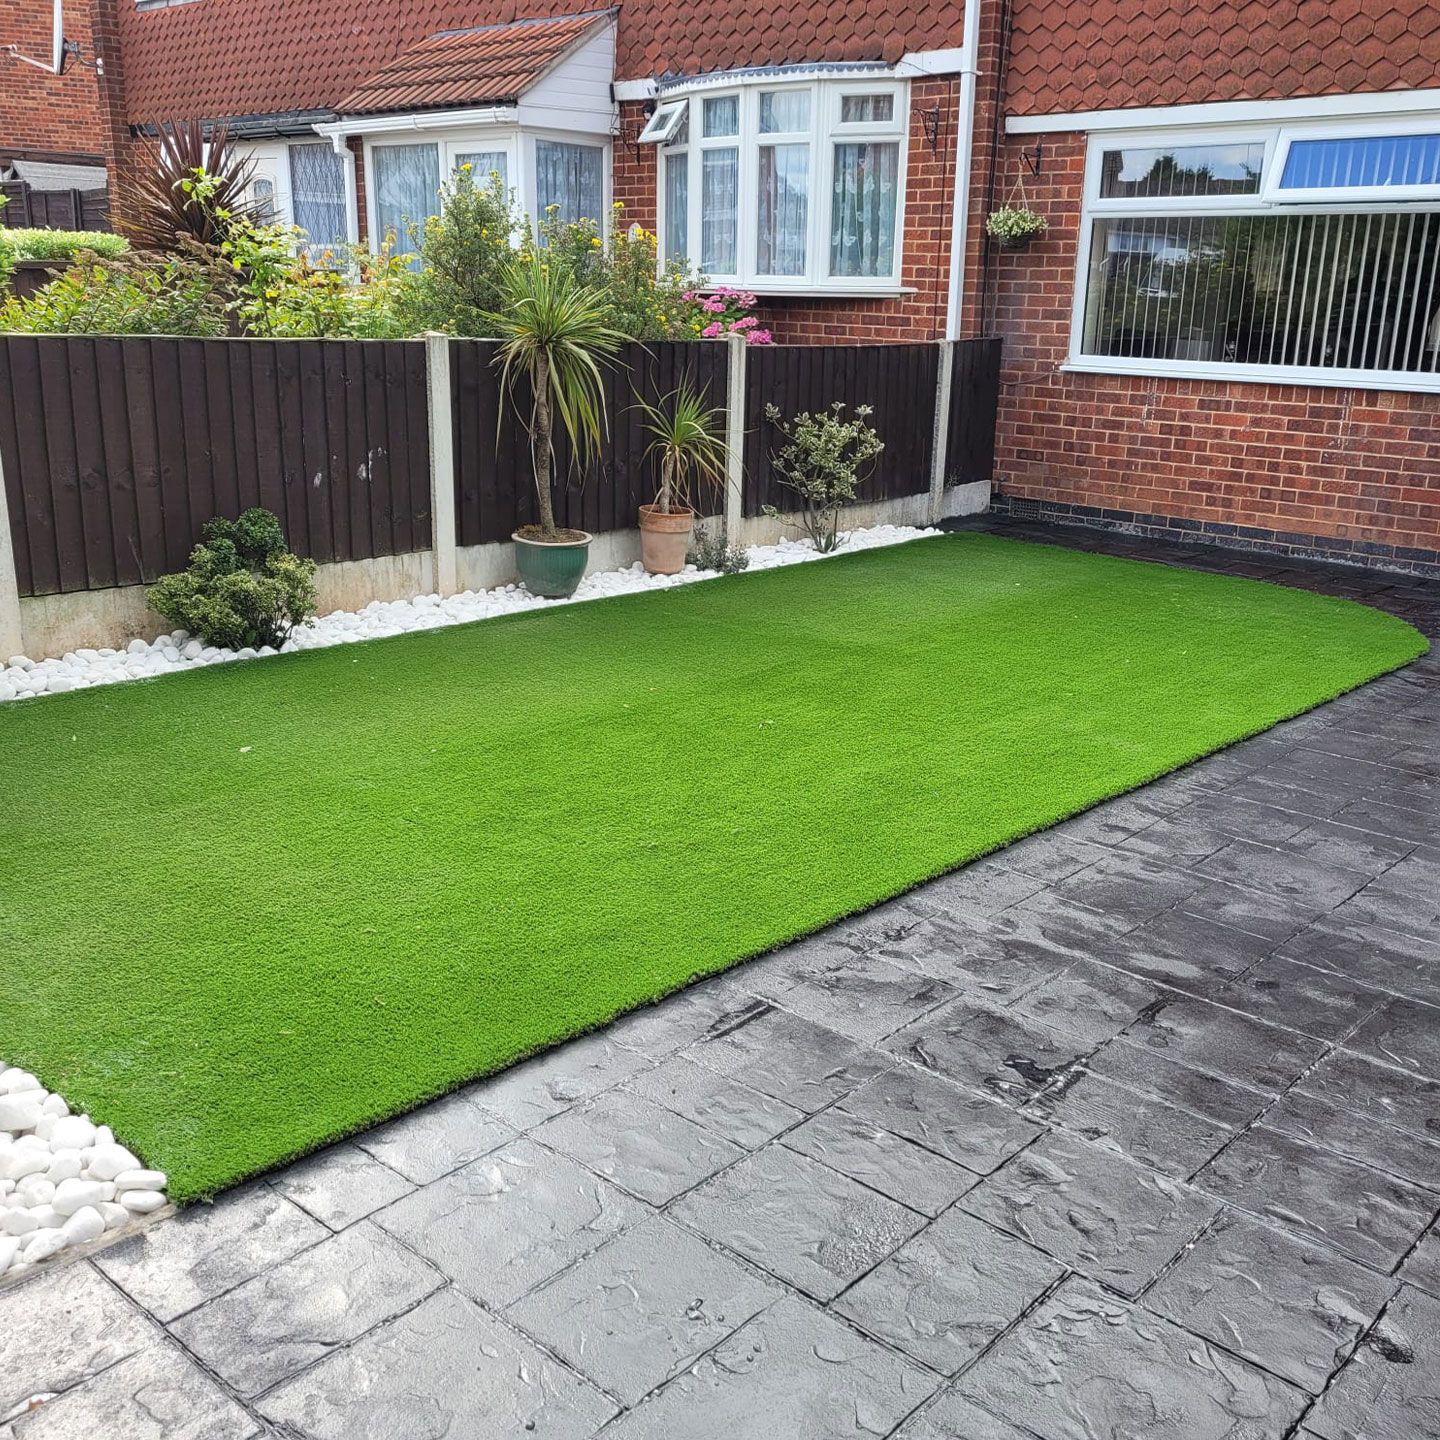 landscaping in Ryton-on-Dunsmore showing new artificial grass and patterned concrete paving